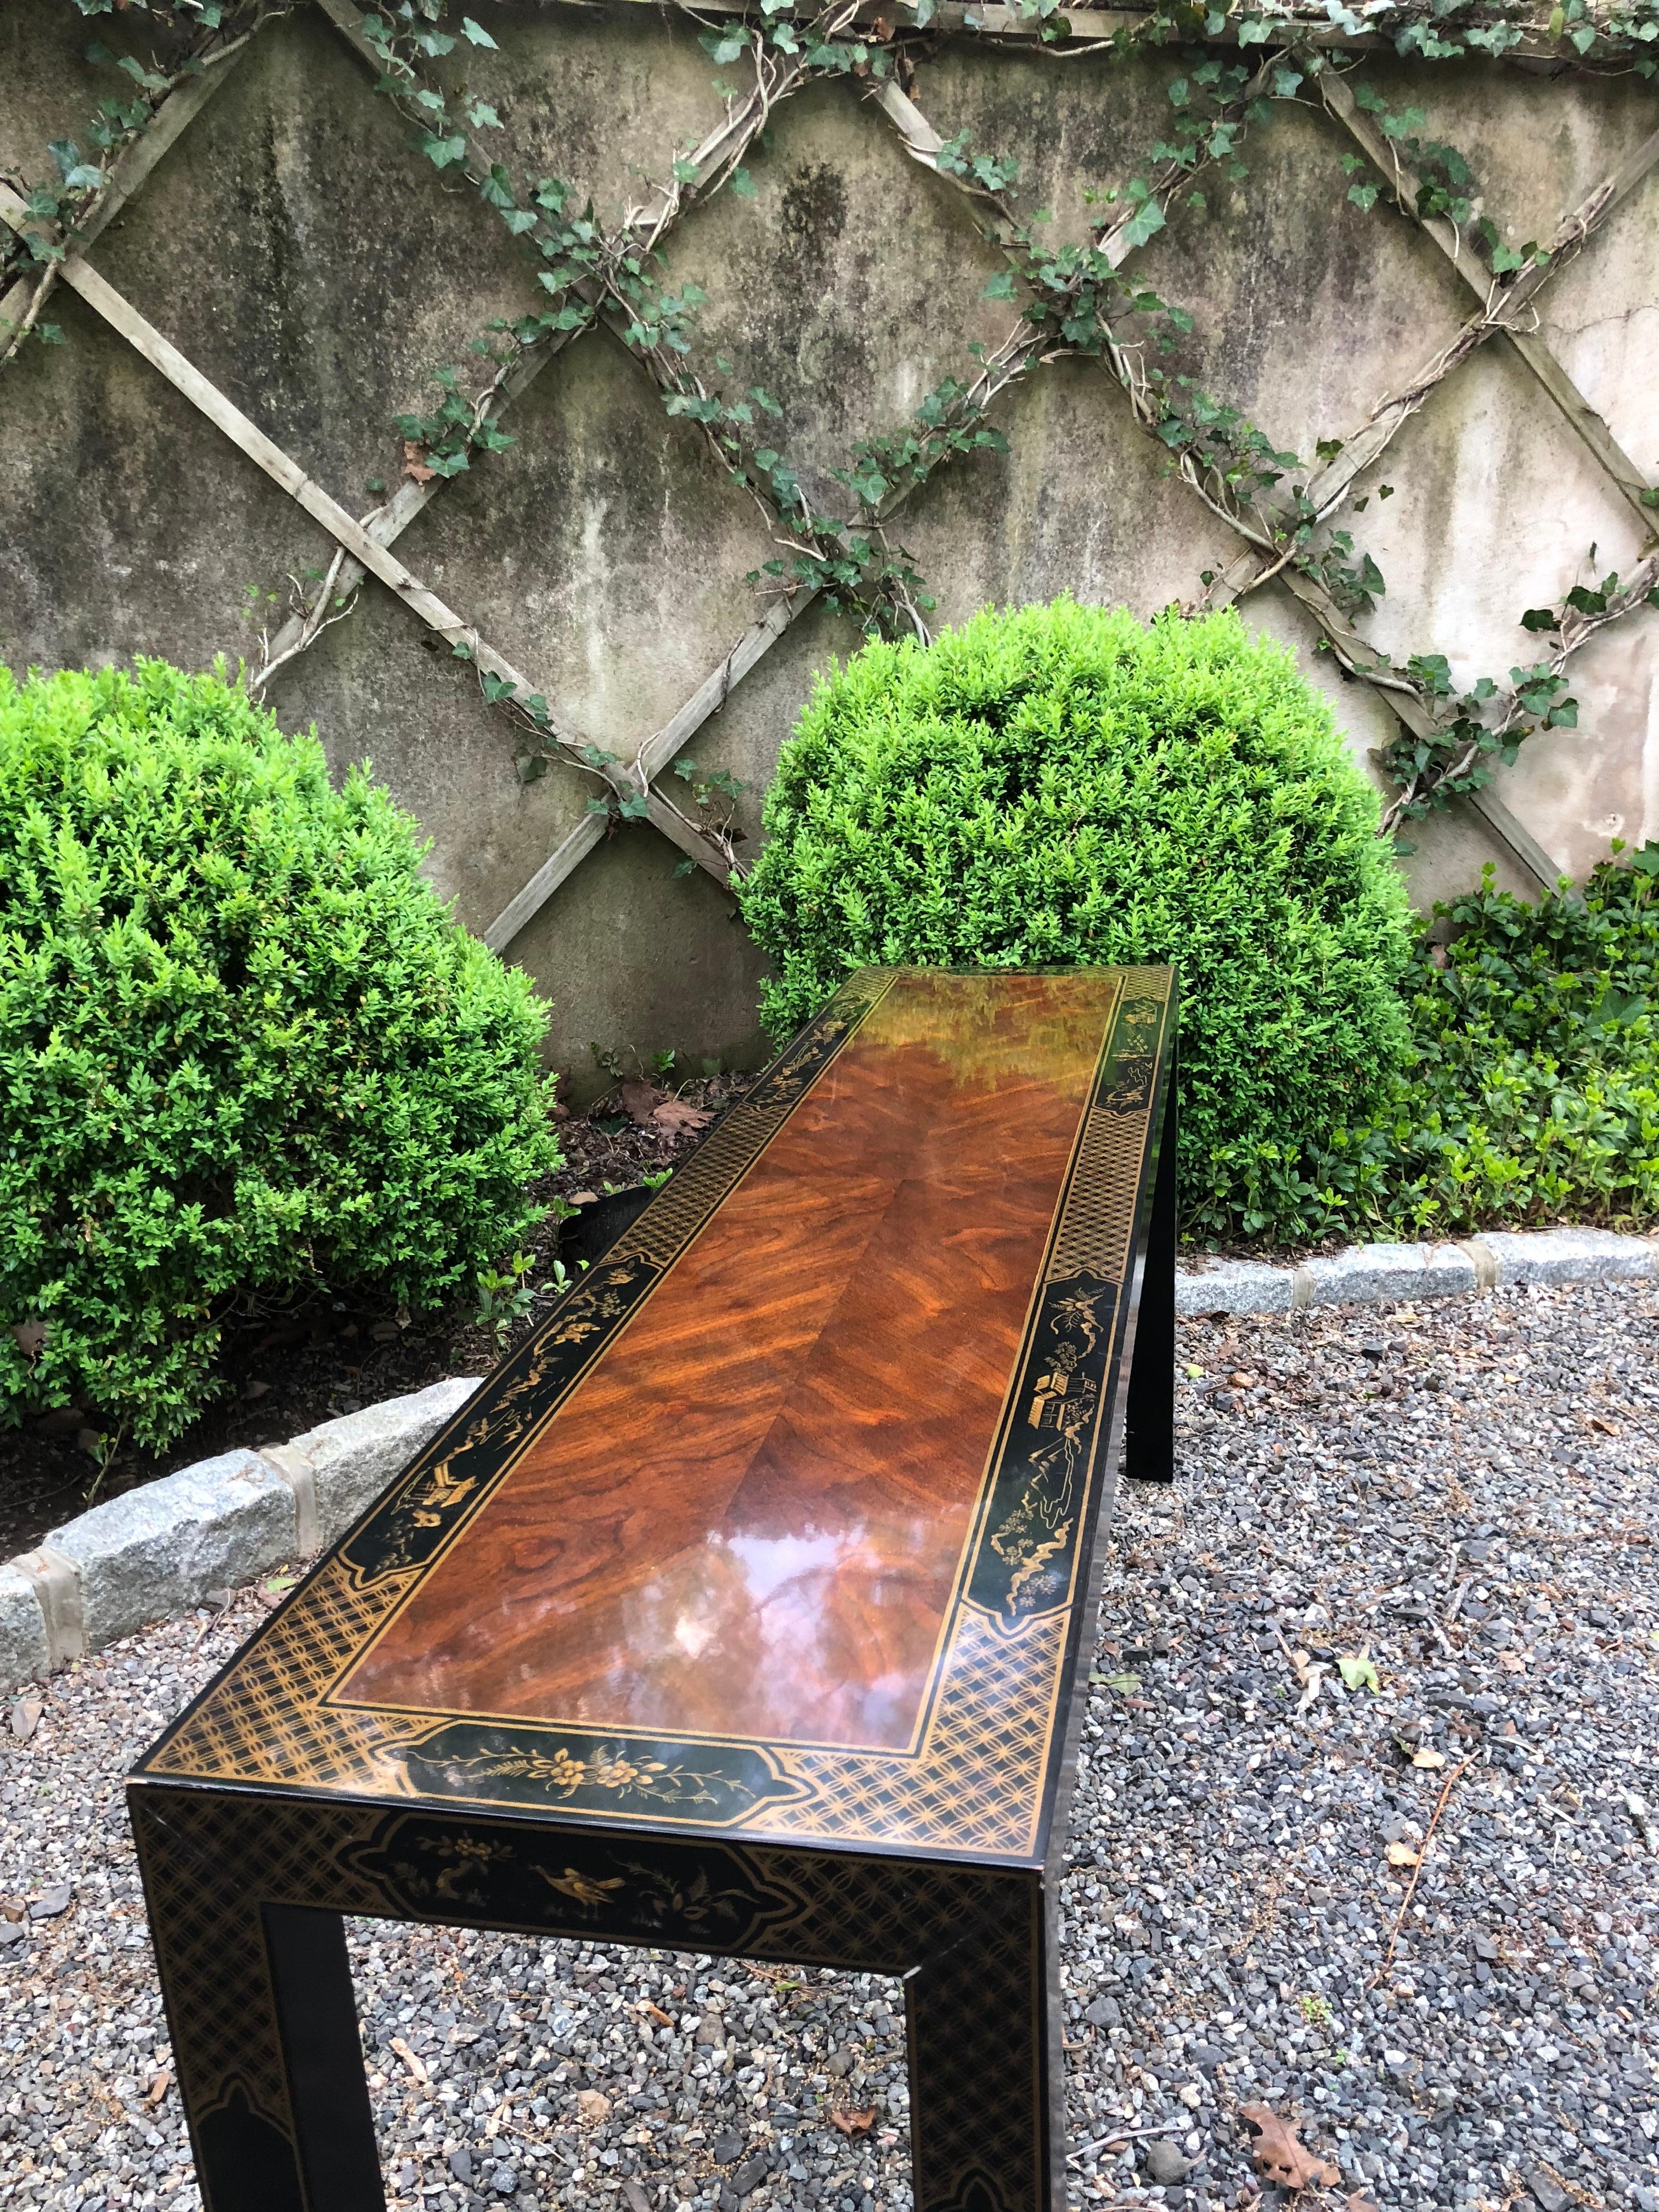 Sophisticated chinoiserie lacquered console having ebonized and lacquered mahogany with hand painted scenes and stencilling. The table is Parson's style, having clean, simple lines. Hand painted detail on each leg. The grain of the wood is beautiful